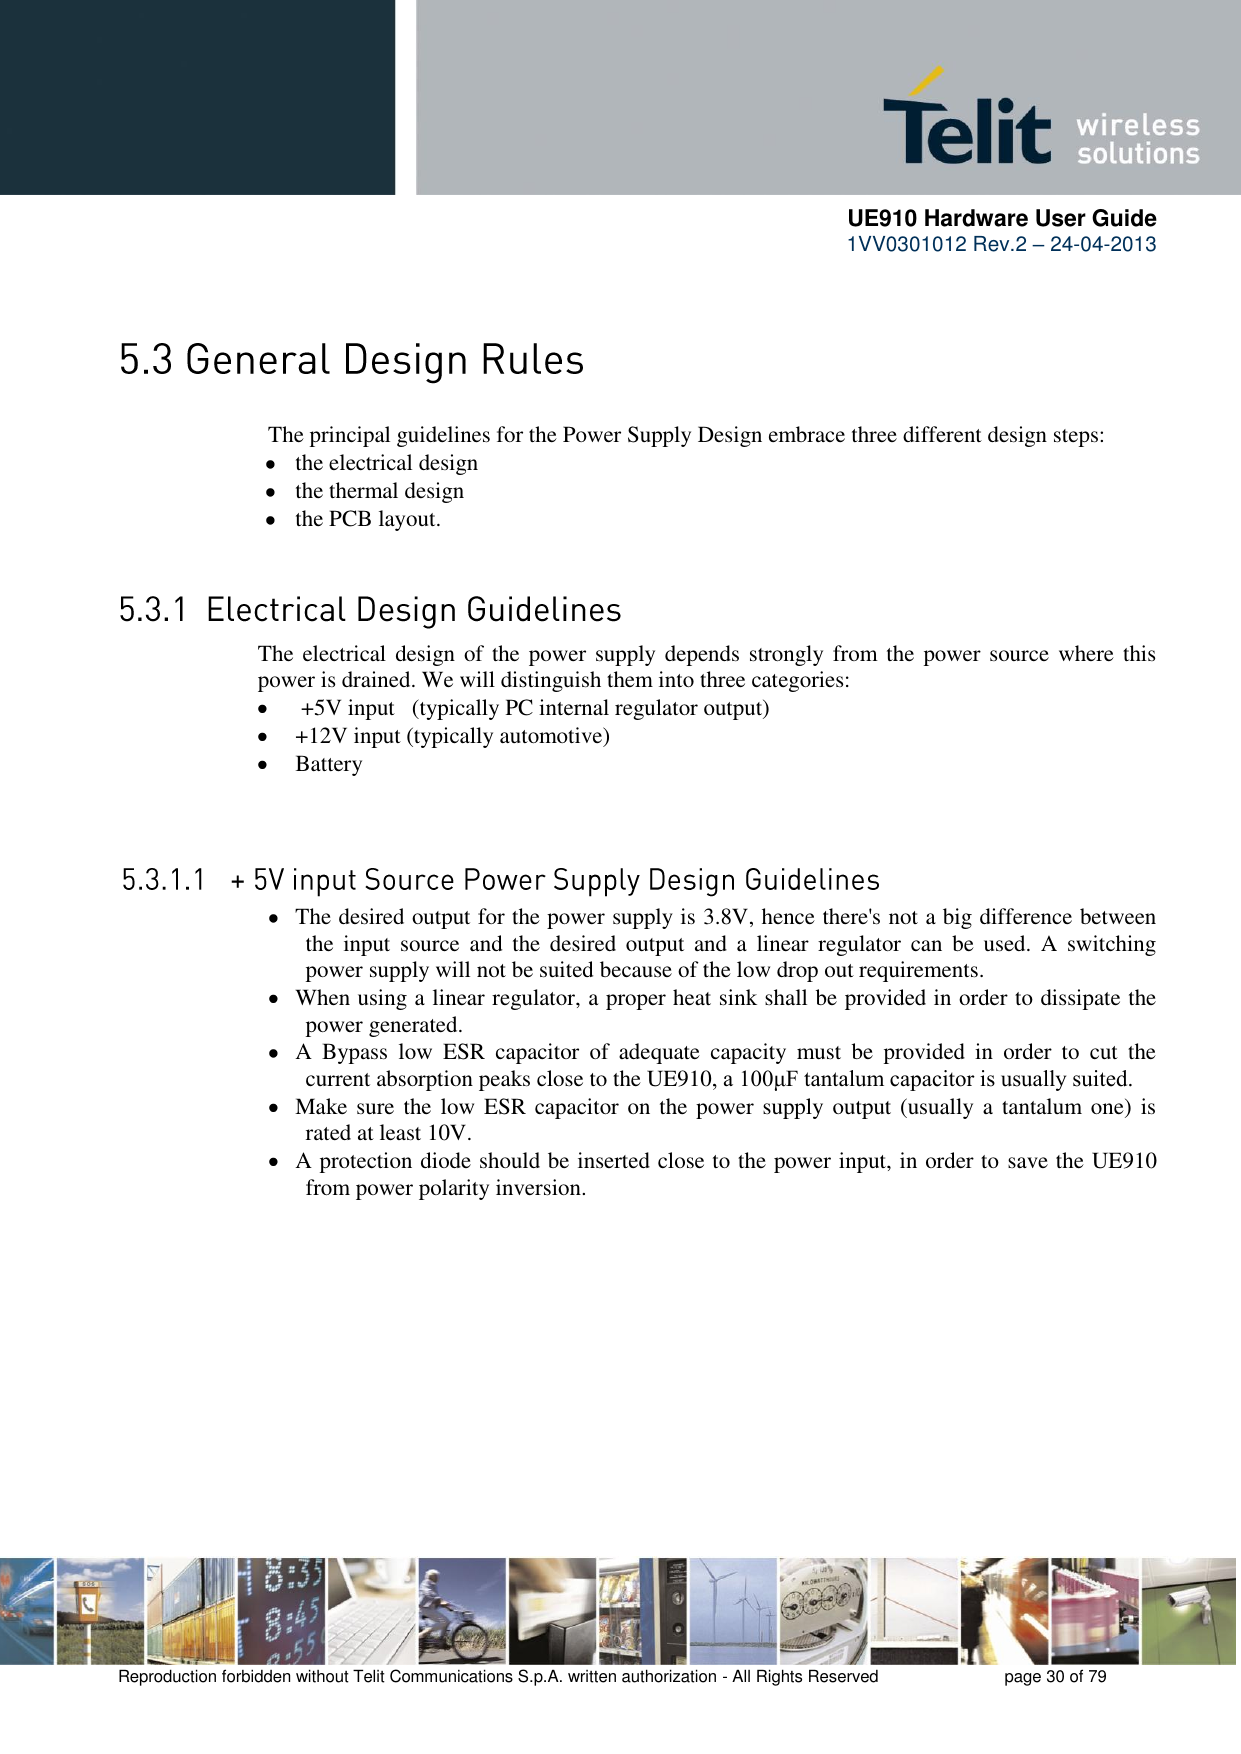      UE910 Hardware User Guide  1VV0301012 Rev.2 – 24-04-2013    Reproduction forbidden without Telit Communications S.p.A. written authorization - All Rights Reserved    page 30 of 79    The principal guidelines for the Power Supply Design embrace three different design steps:  the electrical design  the thermal design  the PCB layout.  The electrical design of  the power supply depends strongly from the power source where this power is drained. We will distinguish them into three categories:   +5V input   (typically PC internal regulator output)  +12V input (typically automotive)  Battery   The desired output for the power supply is 3.8V, hence there&apos;s not a big difference between the  input  source  and  the  desired output  and  a  linear  regulator  can  be  used.  A  switching power supply will not be suited because of the low drop out requirements.  When using a linear regulator, a proper heat sink shall be provided in order to dissipate the power generated.  A  Bypass  low  ESR  capacitor  of  adequate  capacity  must  be  provided  in  order  to  cut  the current absorption peaks close to the UE910, a 100μF tantalum capacitor is usually suited.  Make sure the low  ESR capacitor on the power supply output (usually a  tantalum one) is rated at least 10V.  A protection diode should be inserted close to the power input, in order to save the UE910 from power polarity inversion. 